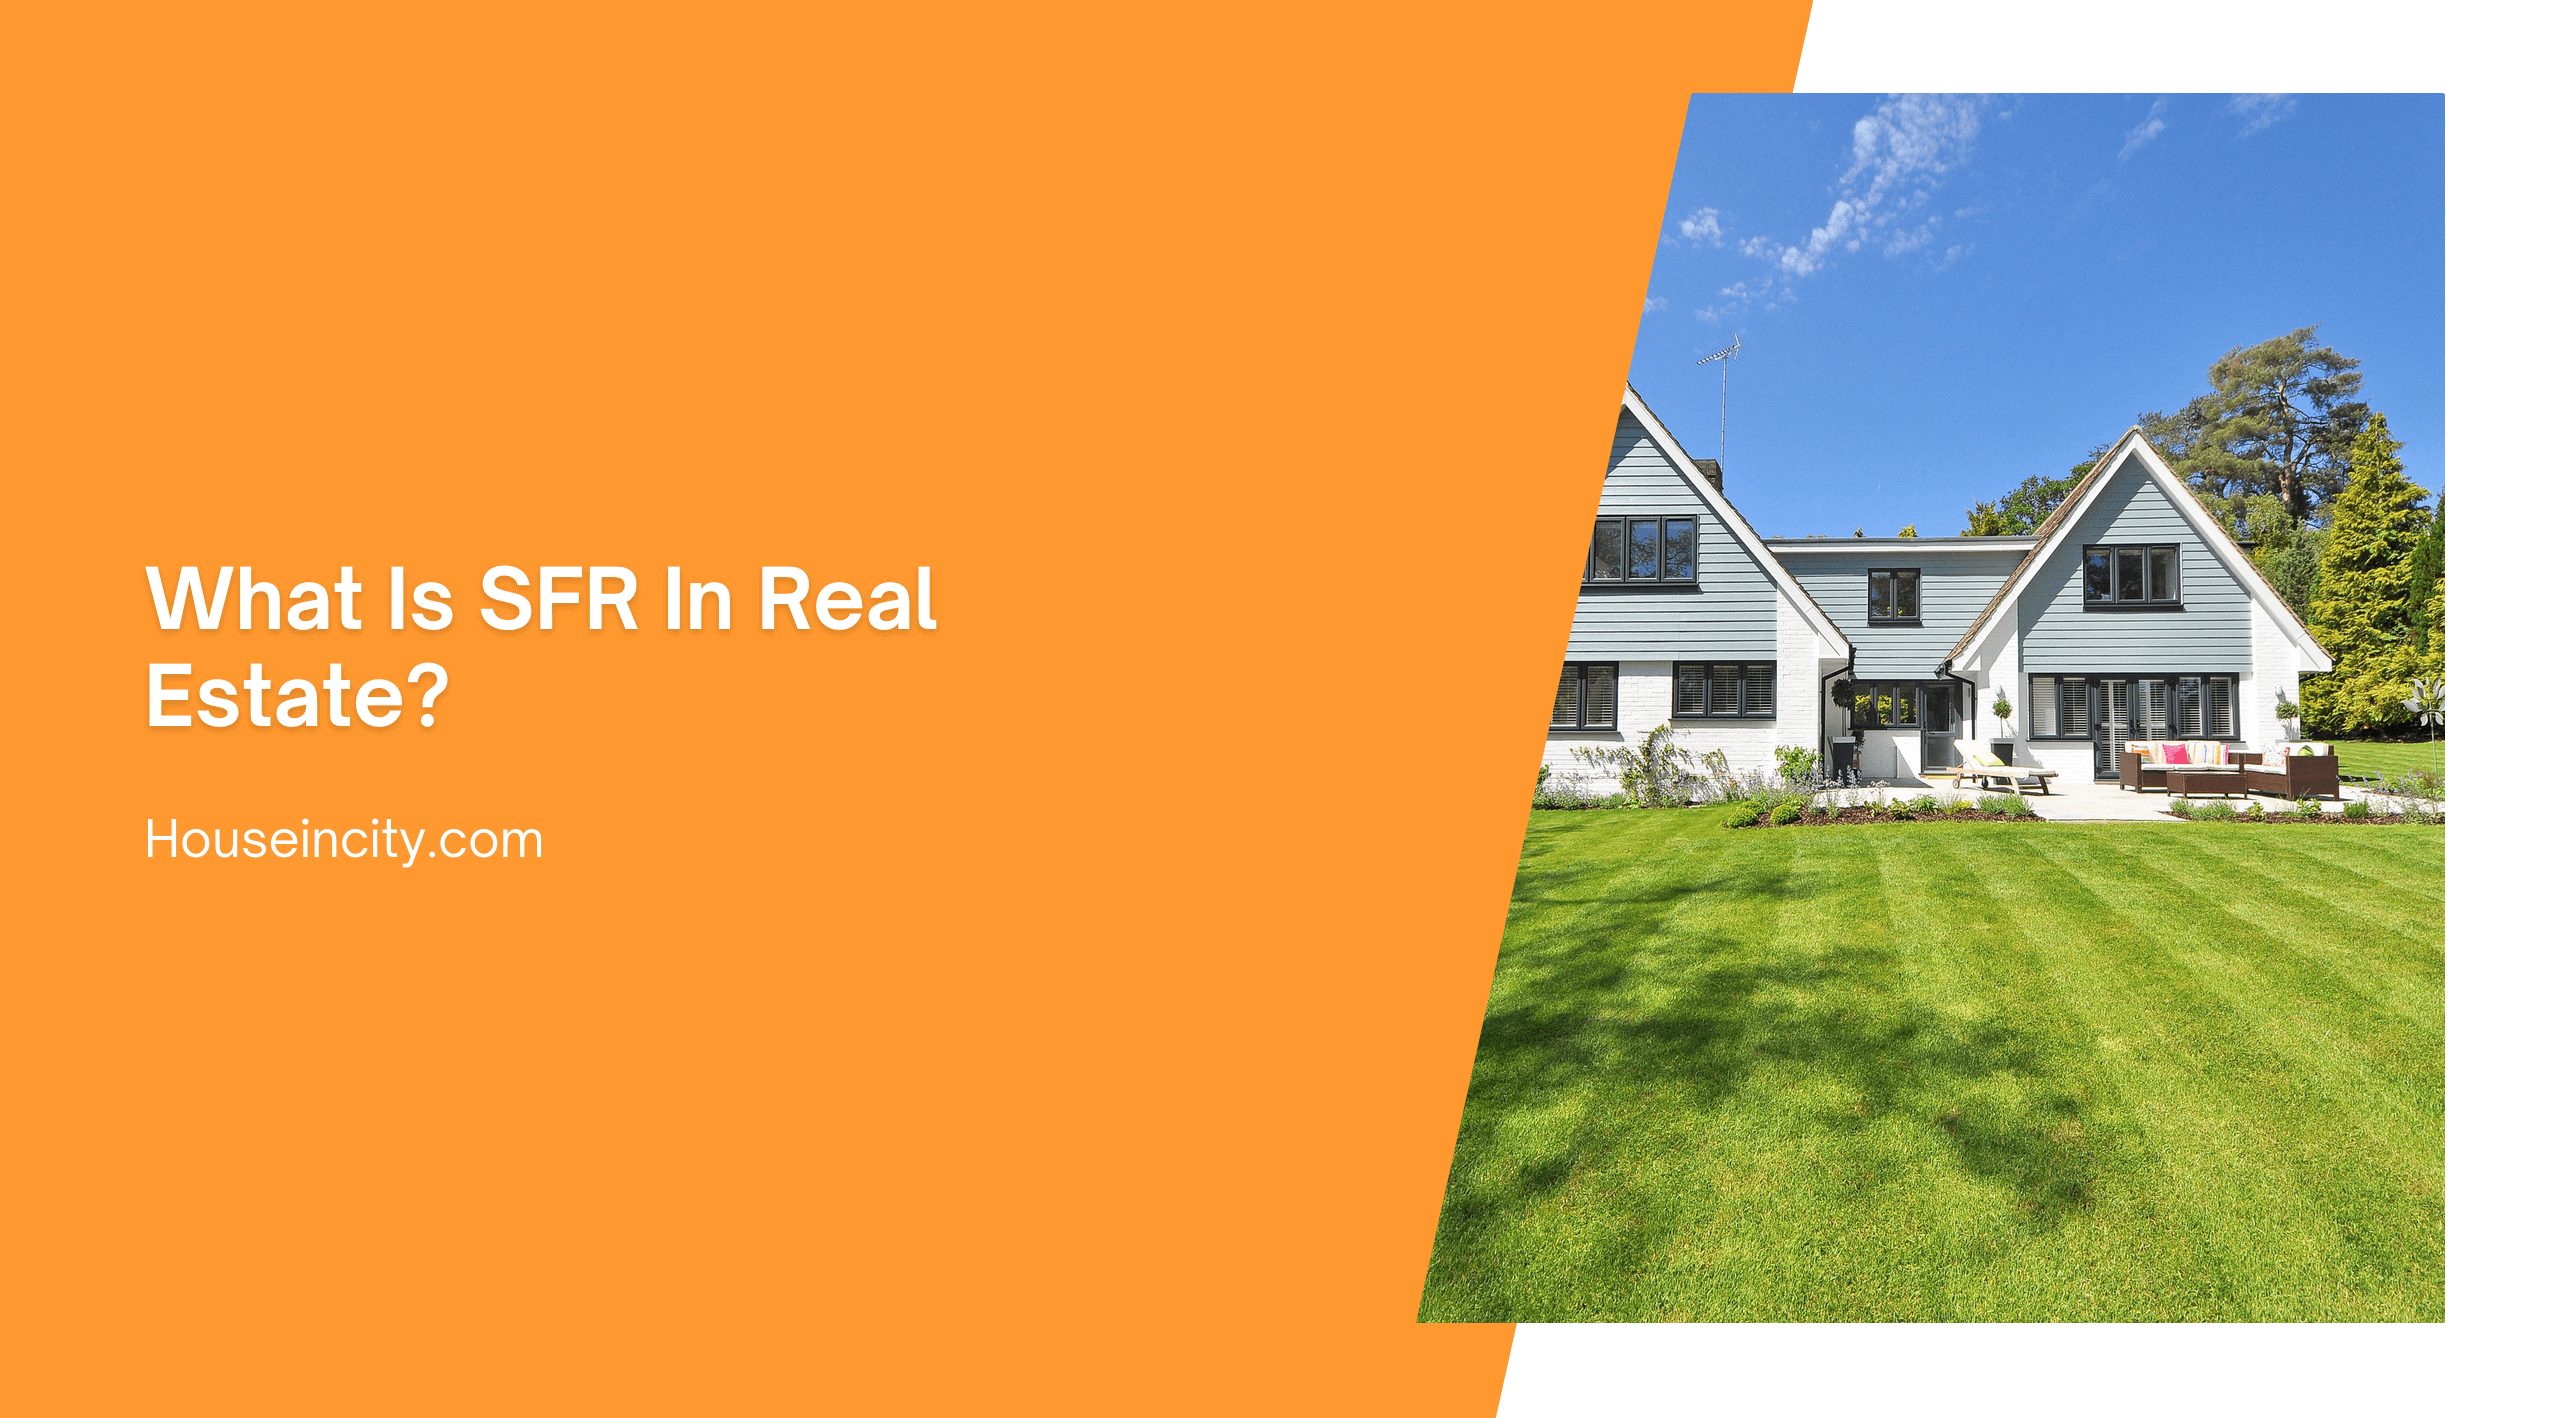 What Is SFR In Real Estate?